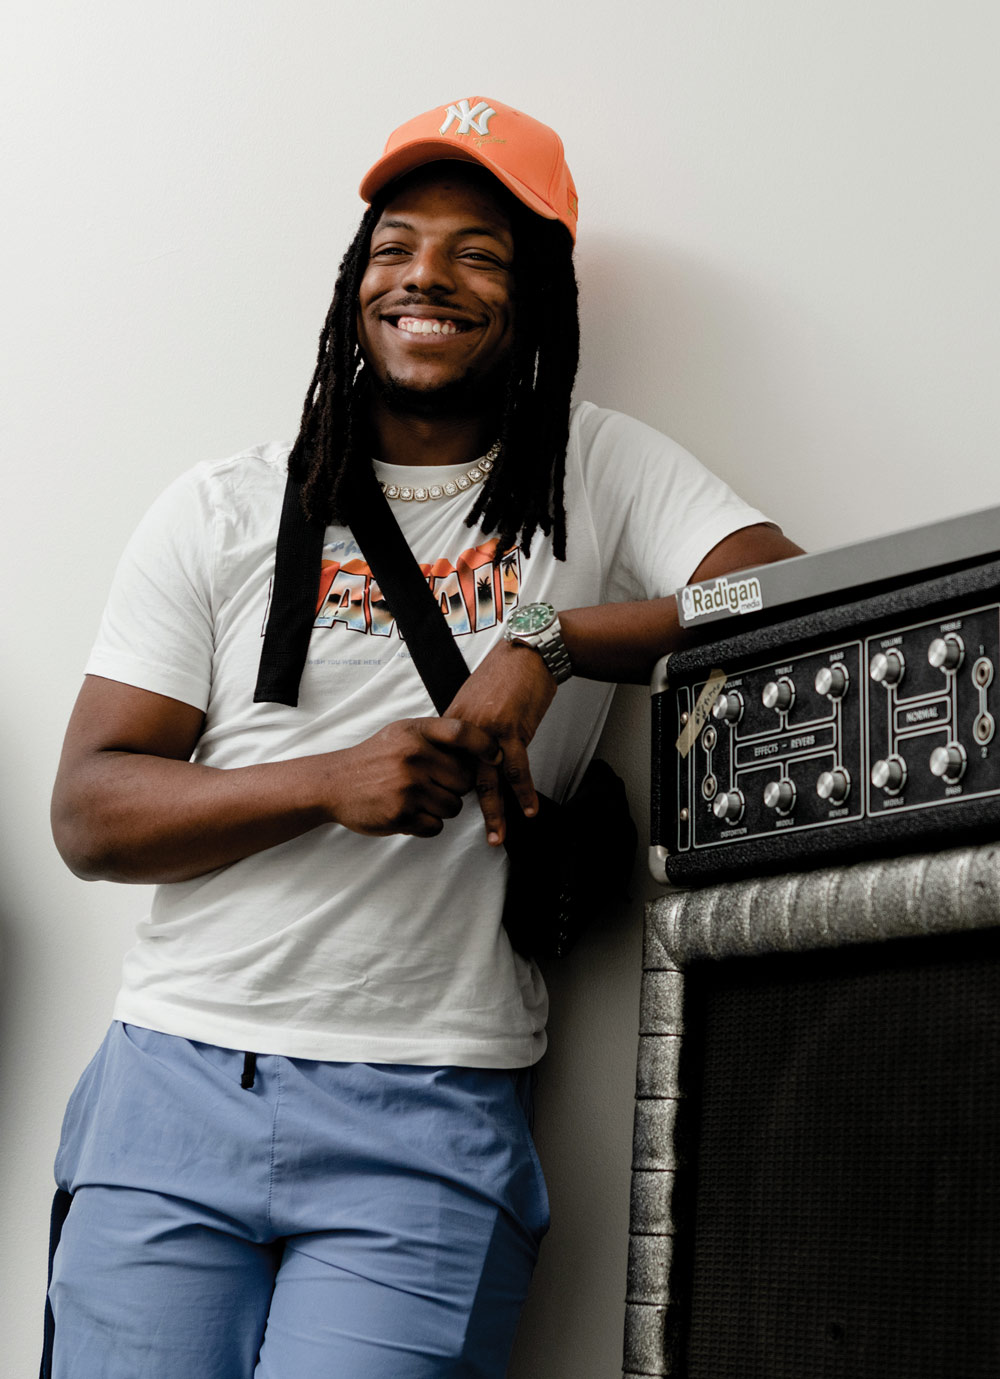 Student in orange yankees hat, smiling and leaning against guitar amp